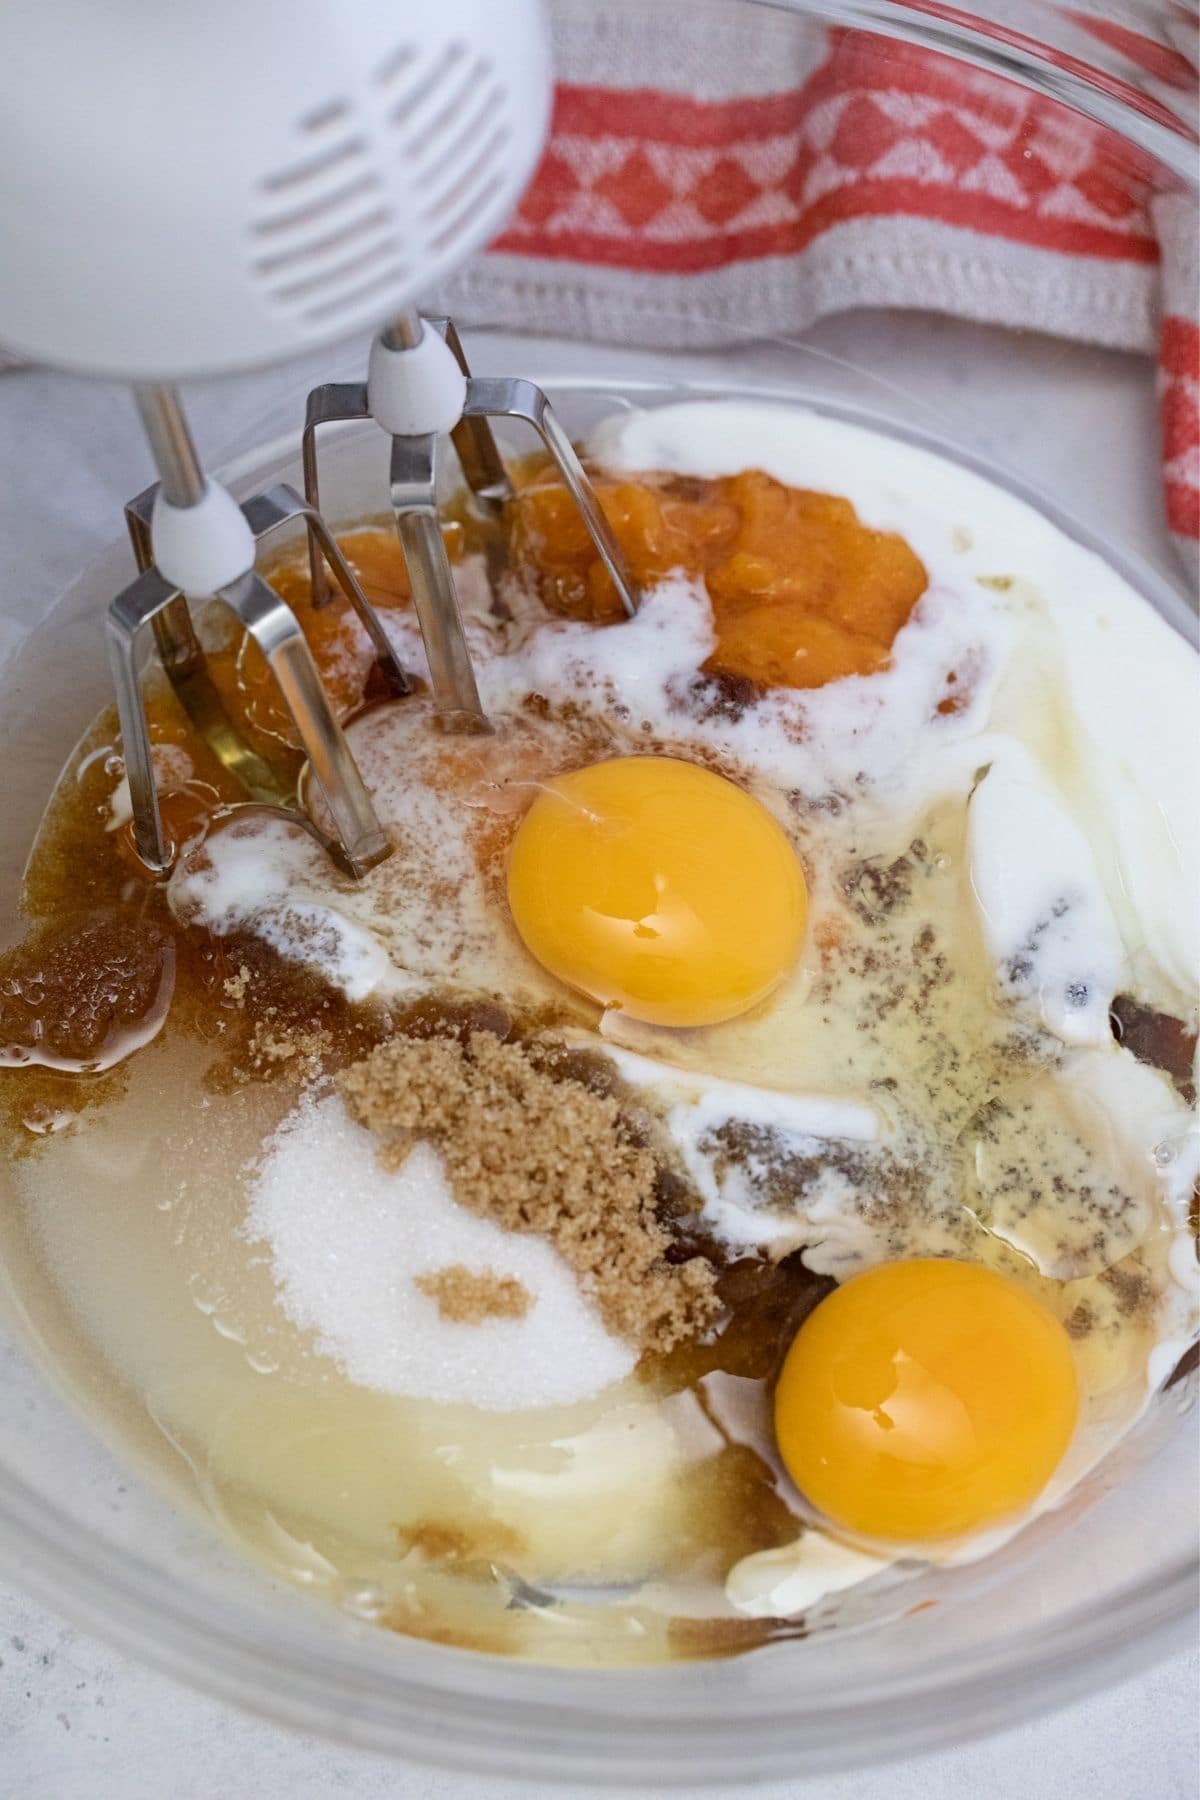 Glass bowl of batter with eggs on top and mixer in side